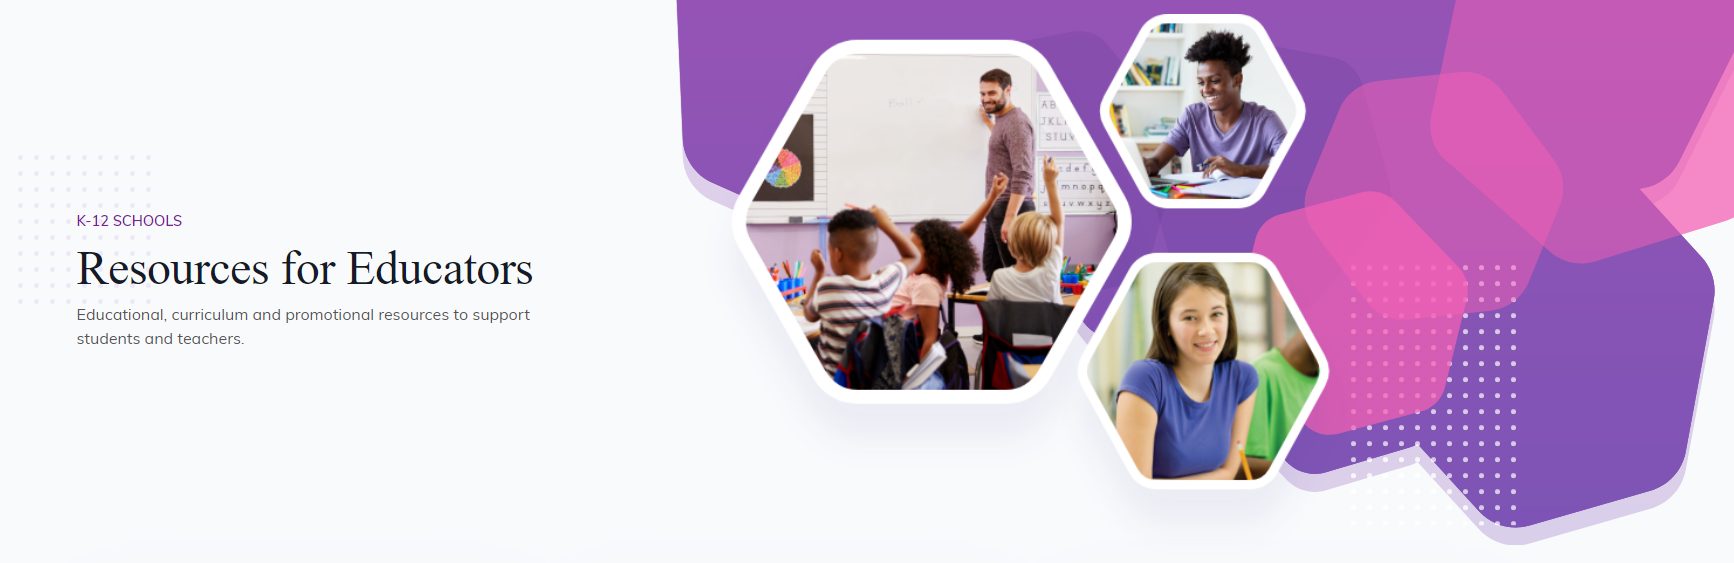 redesigned k-12 resource center screenshot - purple bubbles with lifestyle images